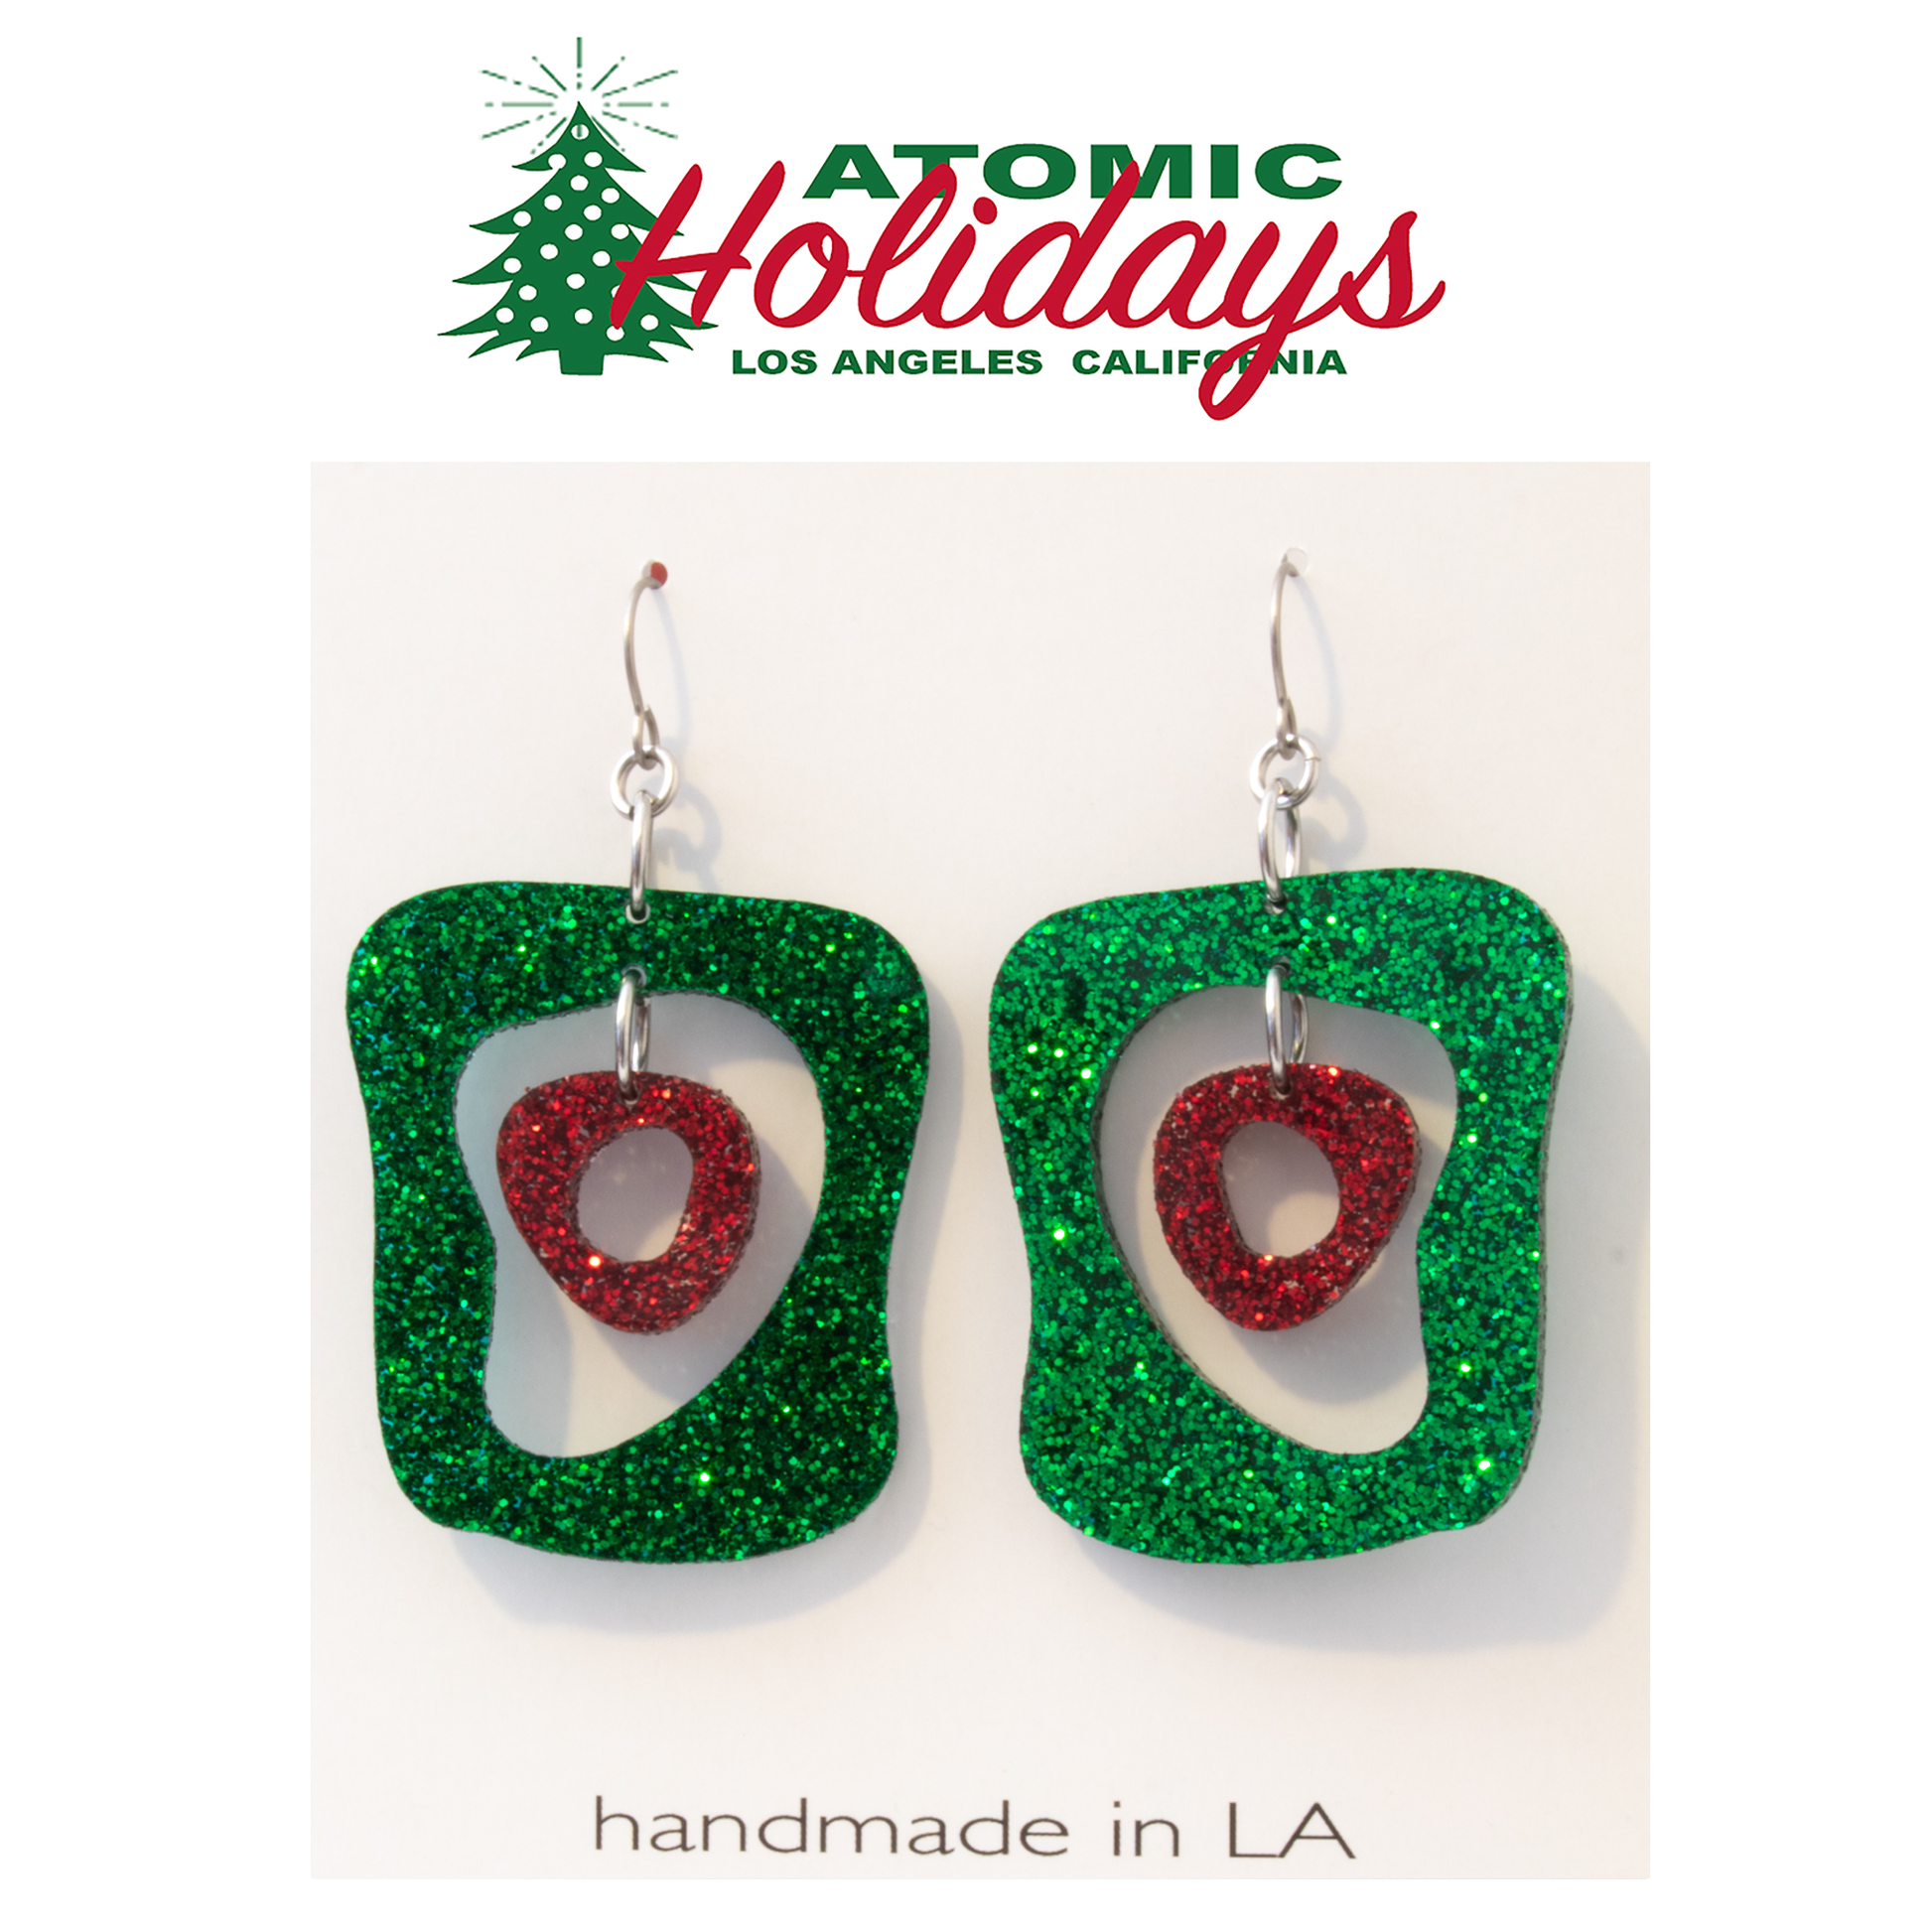 Atomic Holidays Mid Mod Statement Earrings in glitter green and red made in Los Angeles by AtomicMobiles.com